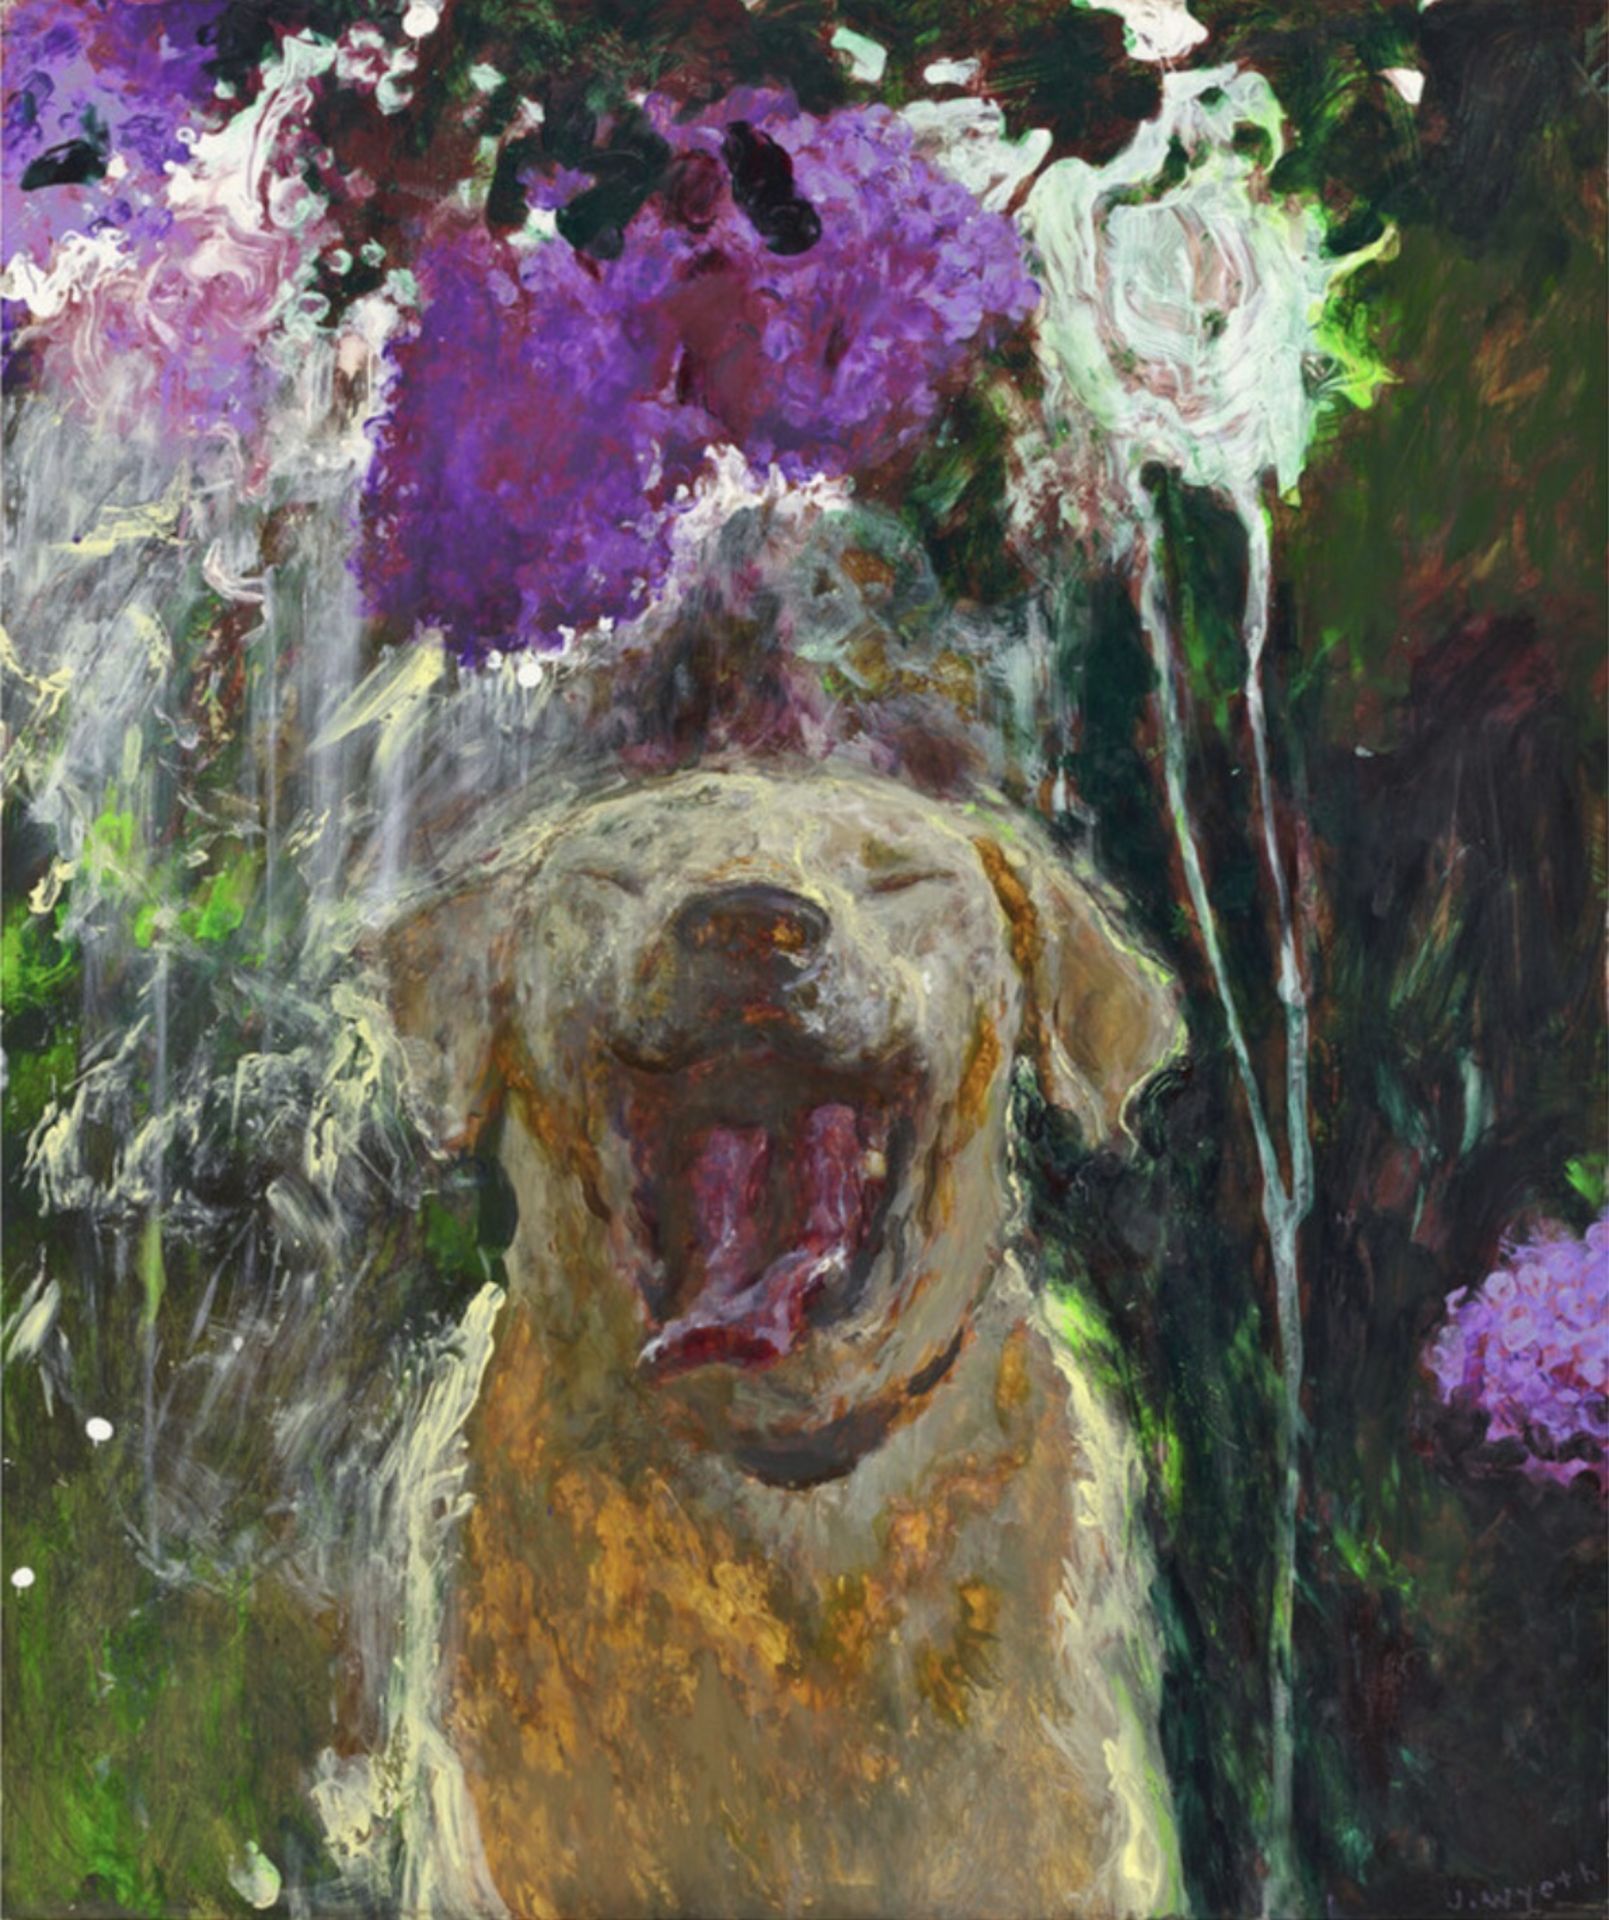 Jamie Wyeth "Dog Under Lilacs in a Downpour, 2018" Offset Lithograph